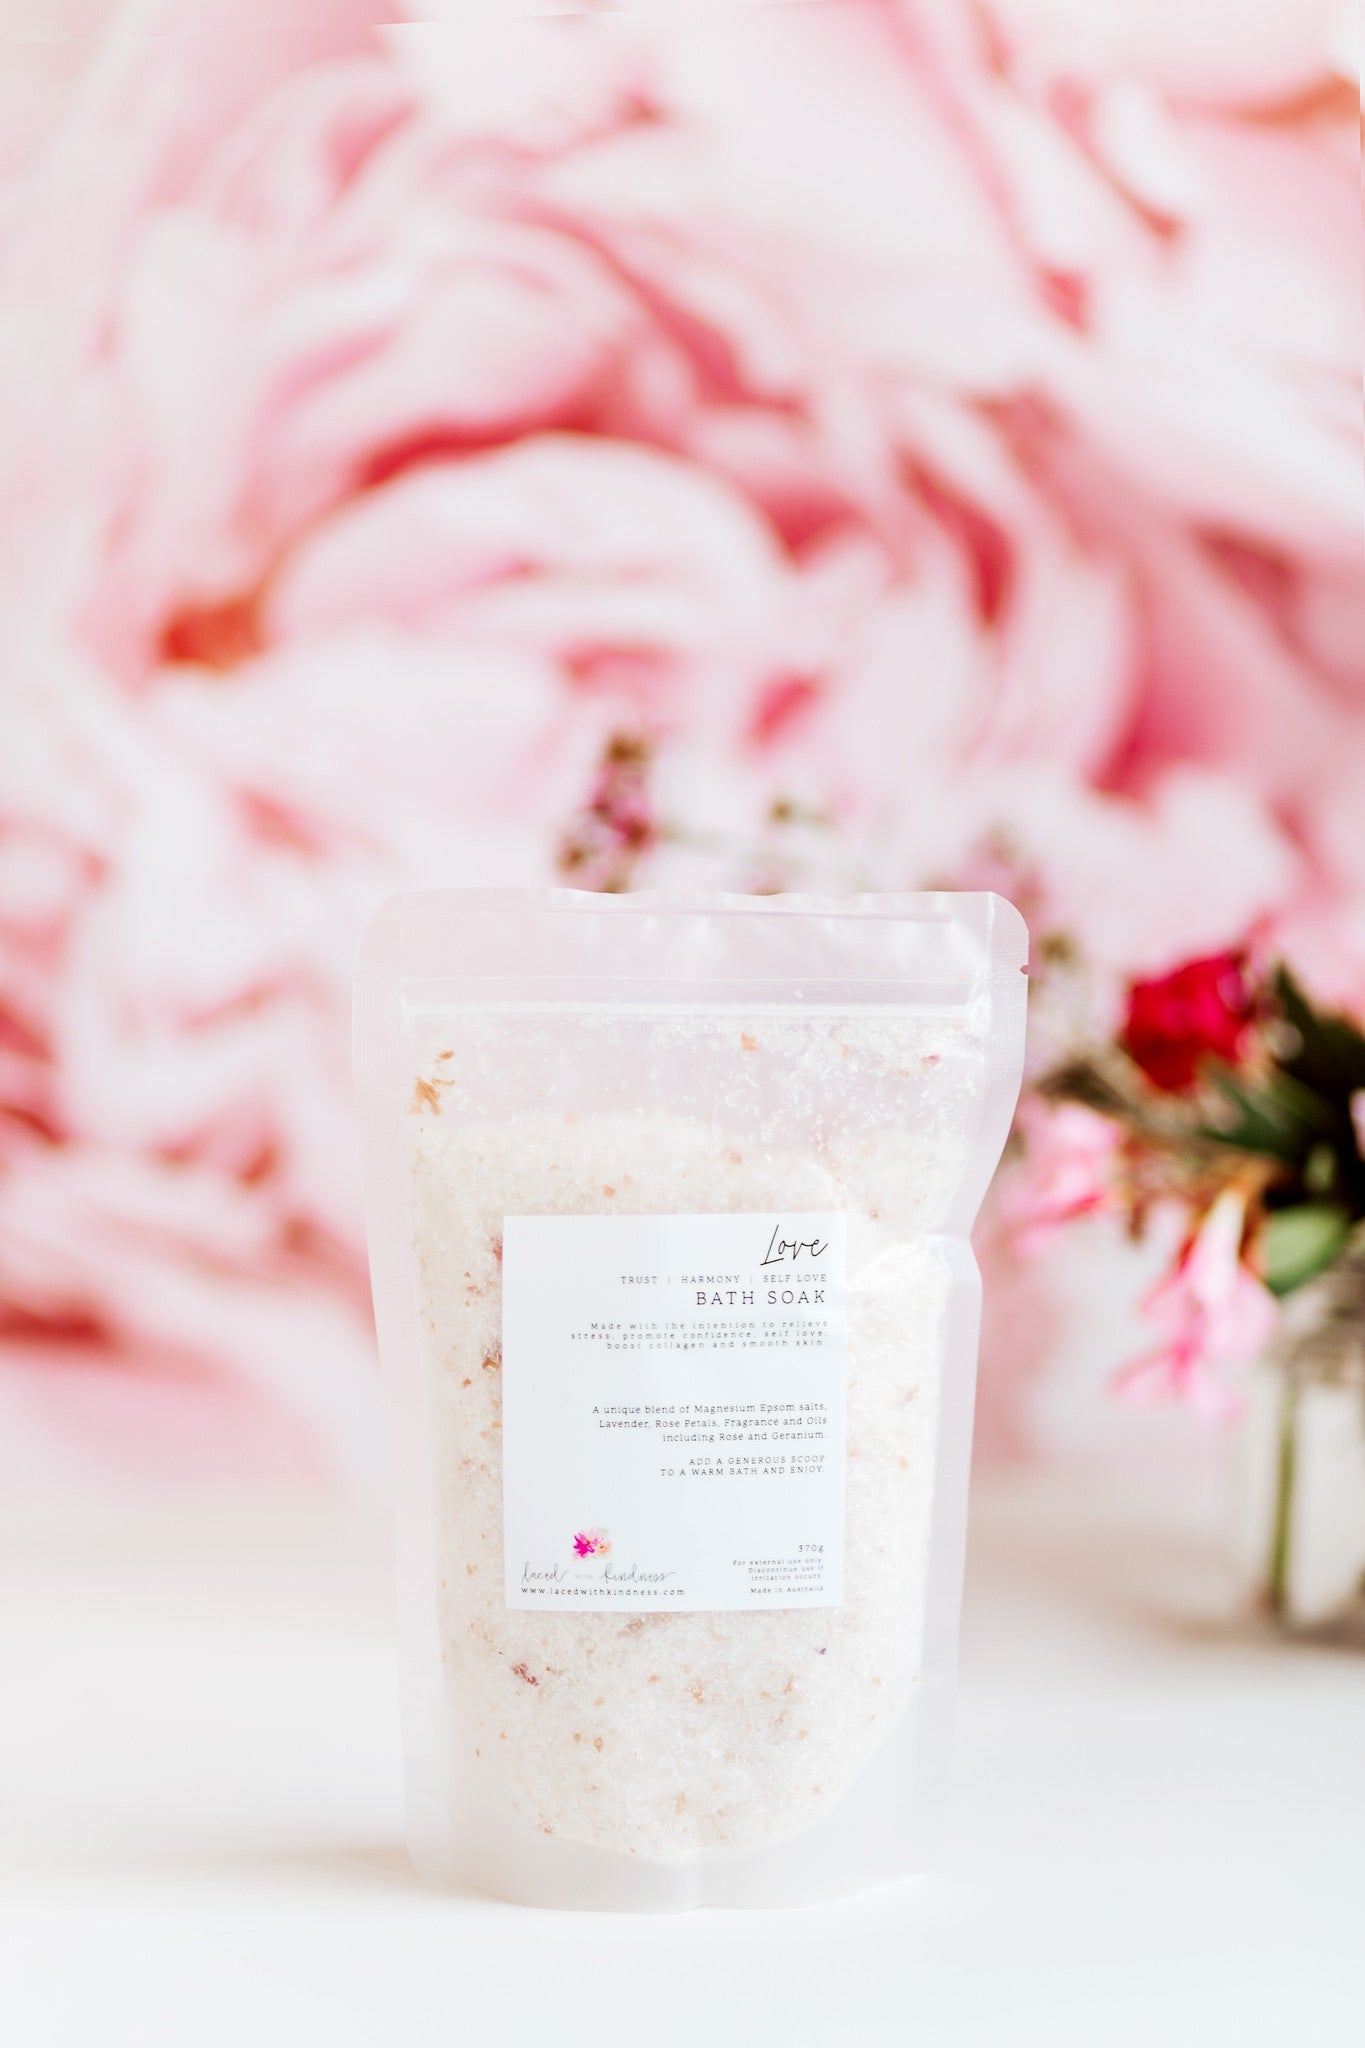 "Love" Bath salts and soak containing magnesium, epsom salts, Rose Petals, essential oils, lavender, rose, geranium. Luxury bath salts for spiritual women. Australian own and made from Laced with Kindness